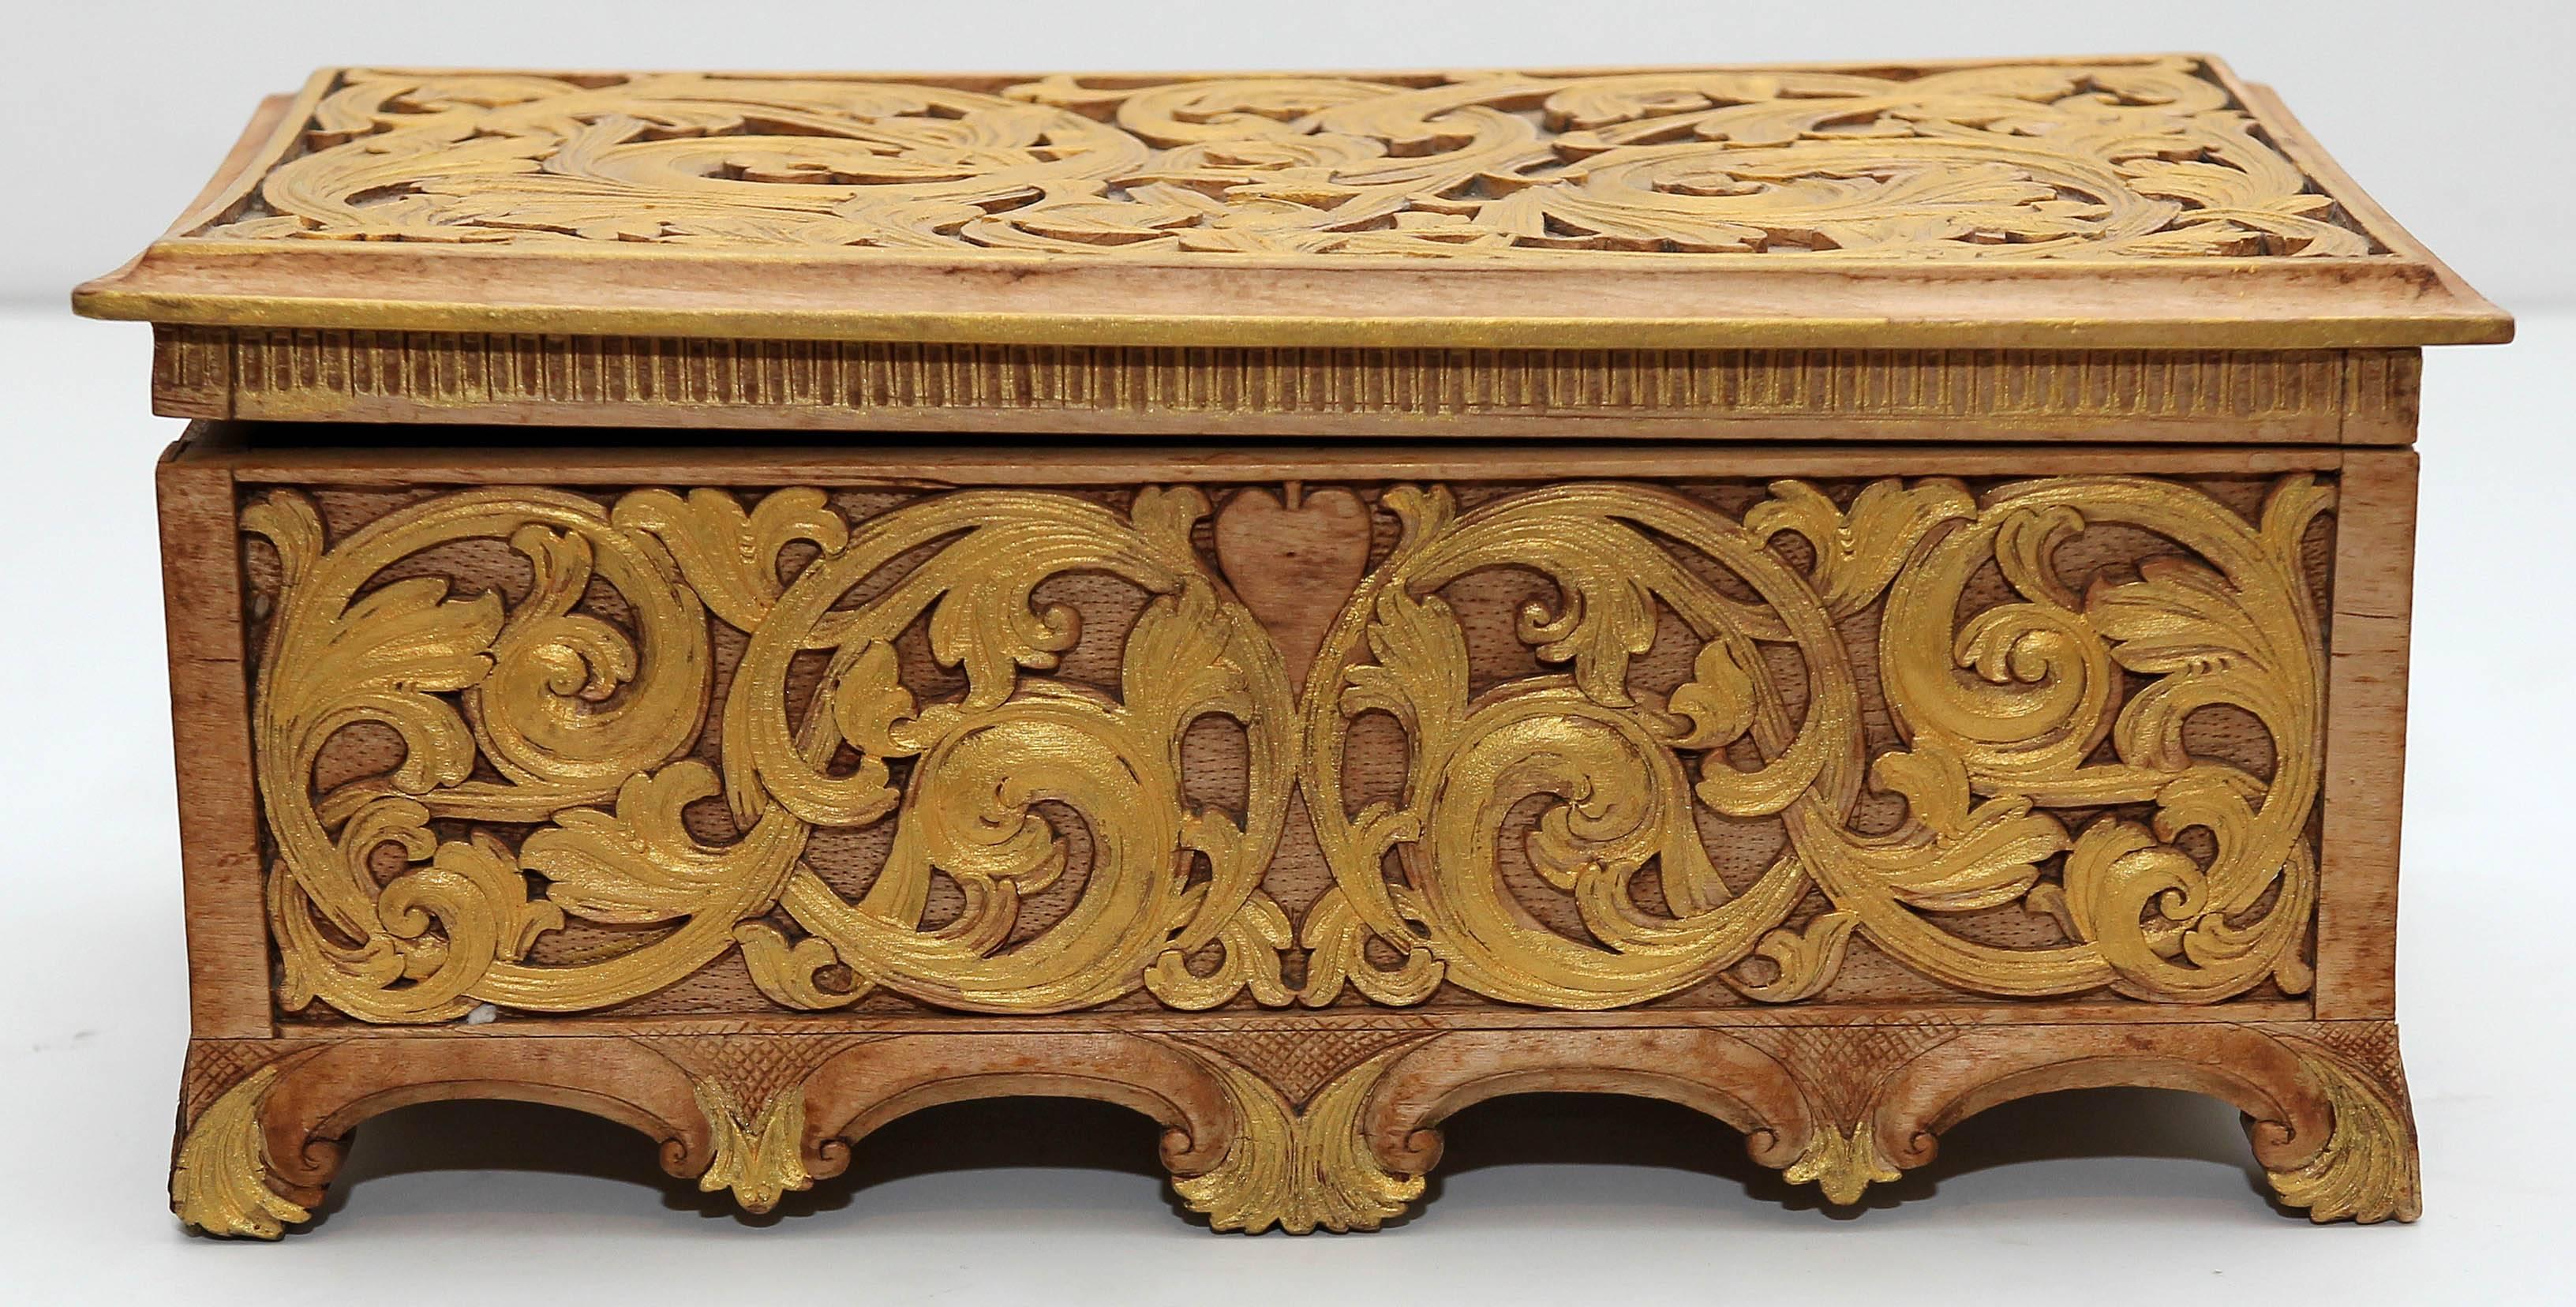 19th century Gothic Revival carved and gilt document box. Decorated with finely carved Gothic tracery.